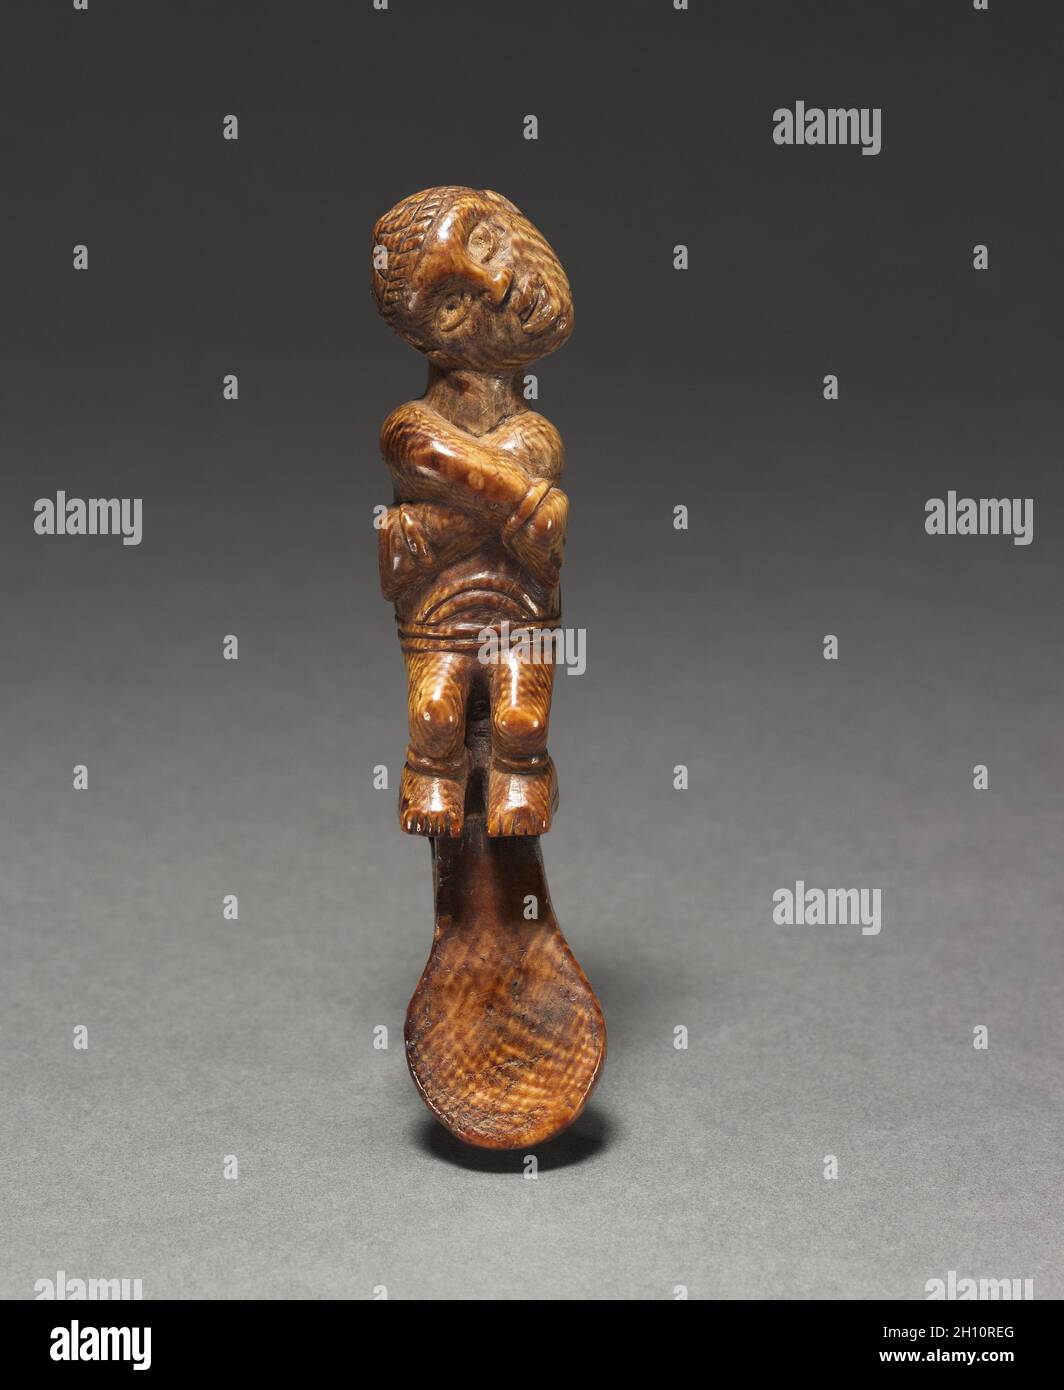 Female Figurine, late 1800s-early 1900s. Central Africa, Democratic Republic of the Congo (most likely), Cabinda, or Republic of the Congo, probably Yombe people. Ivory; overall: 12 x 2.5 x 4.5 cm (4 3/4 x 1 x 1 3/4 in.). Stock Photo